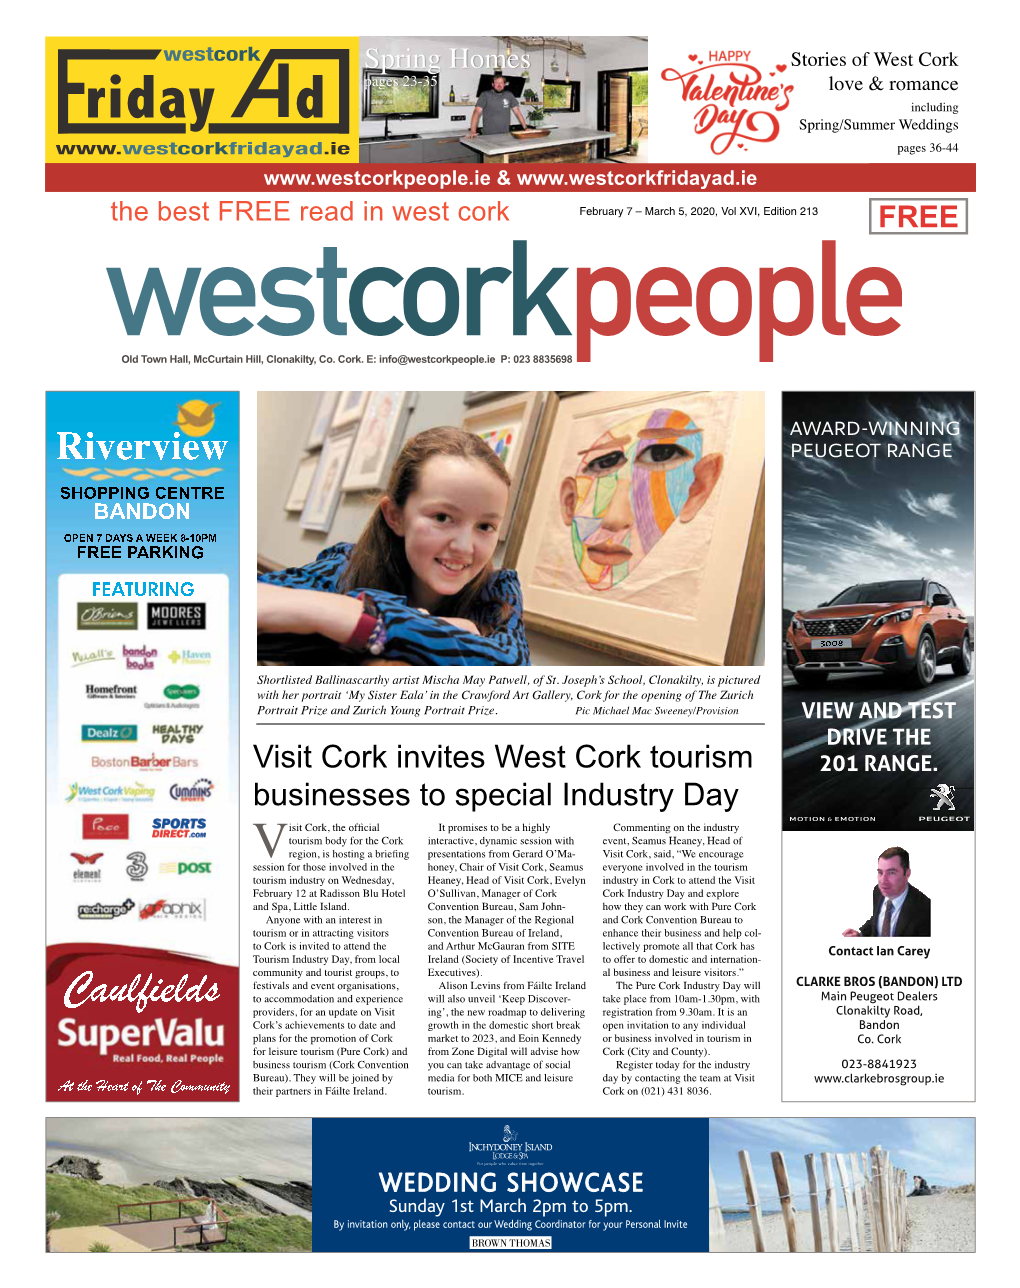 Visit Cork Invites West Cork Tourism Businesses to Special Industry